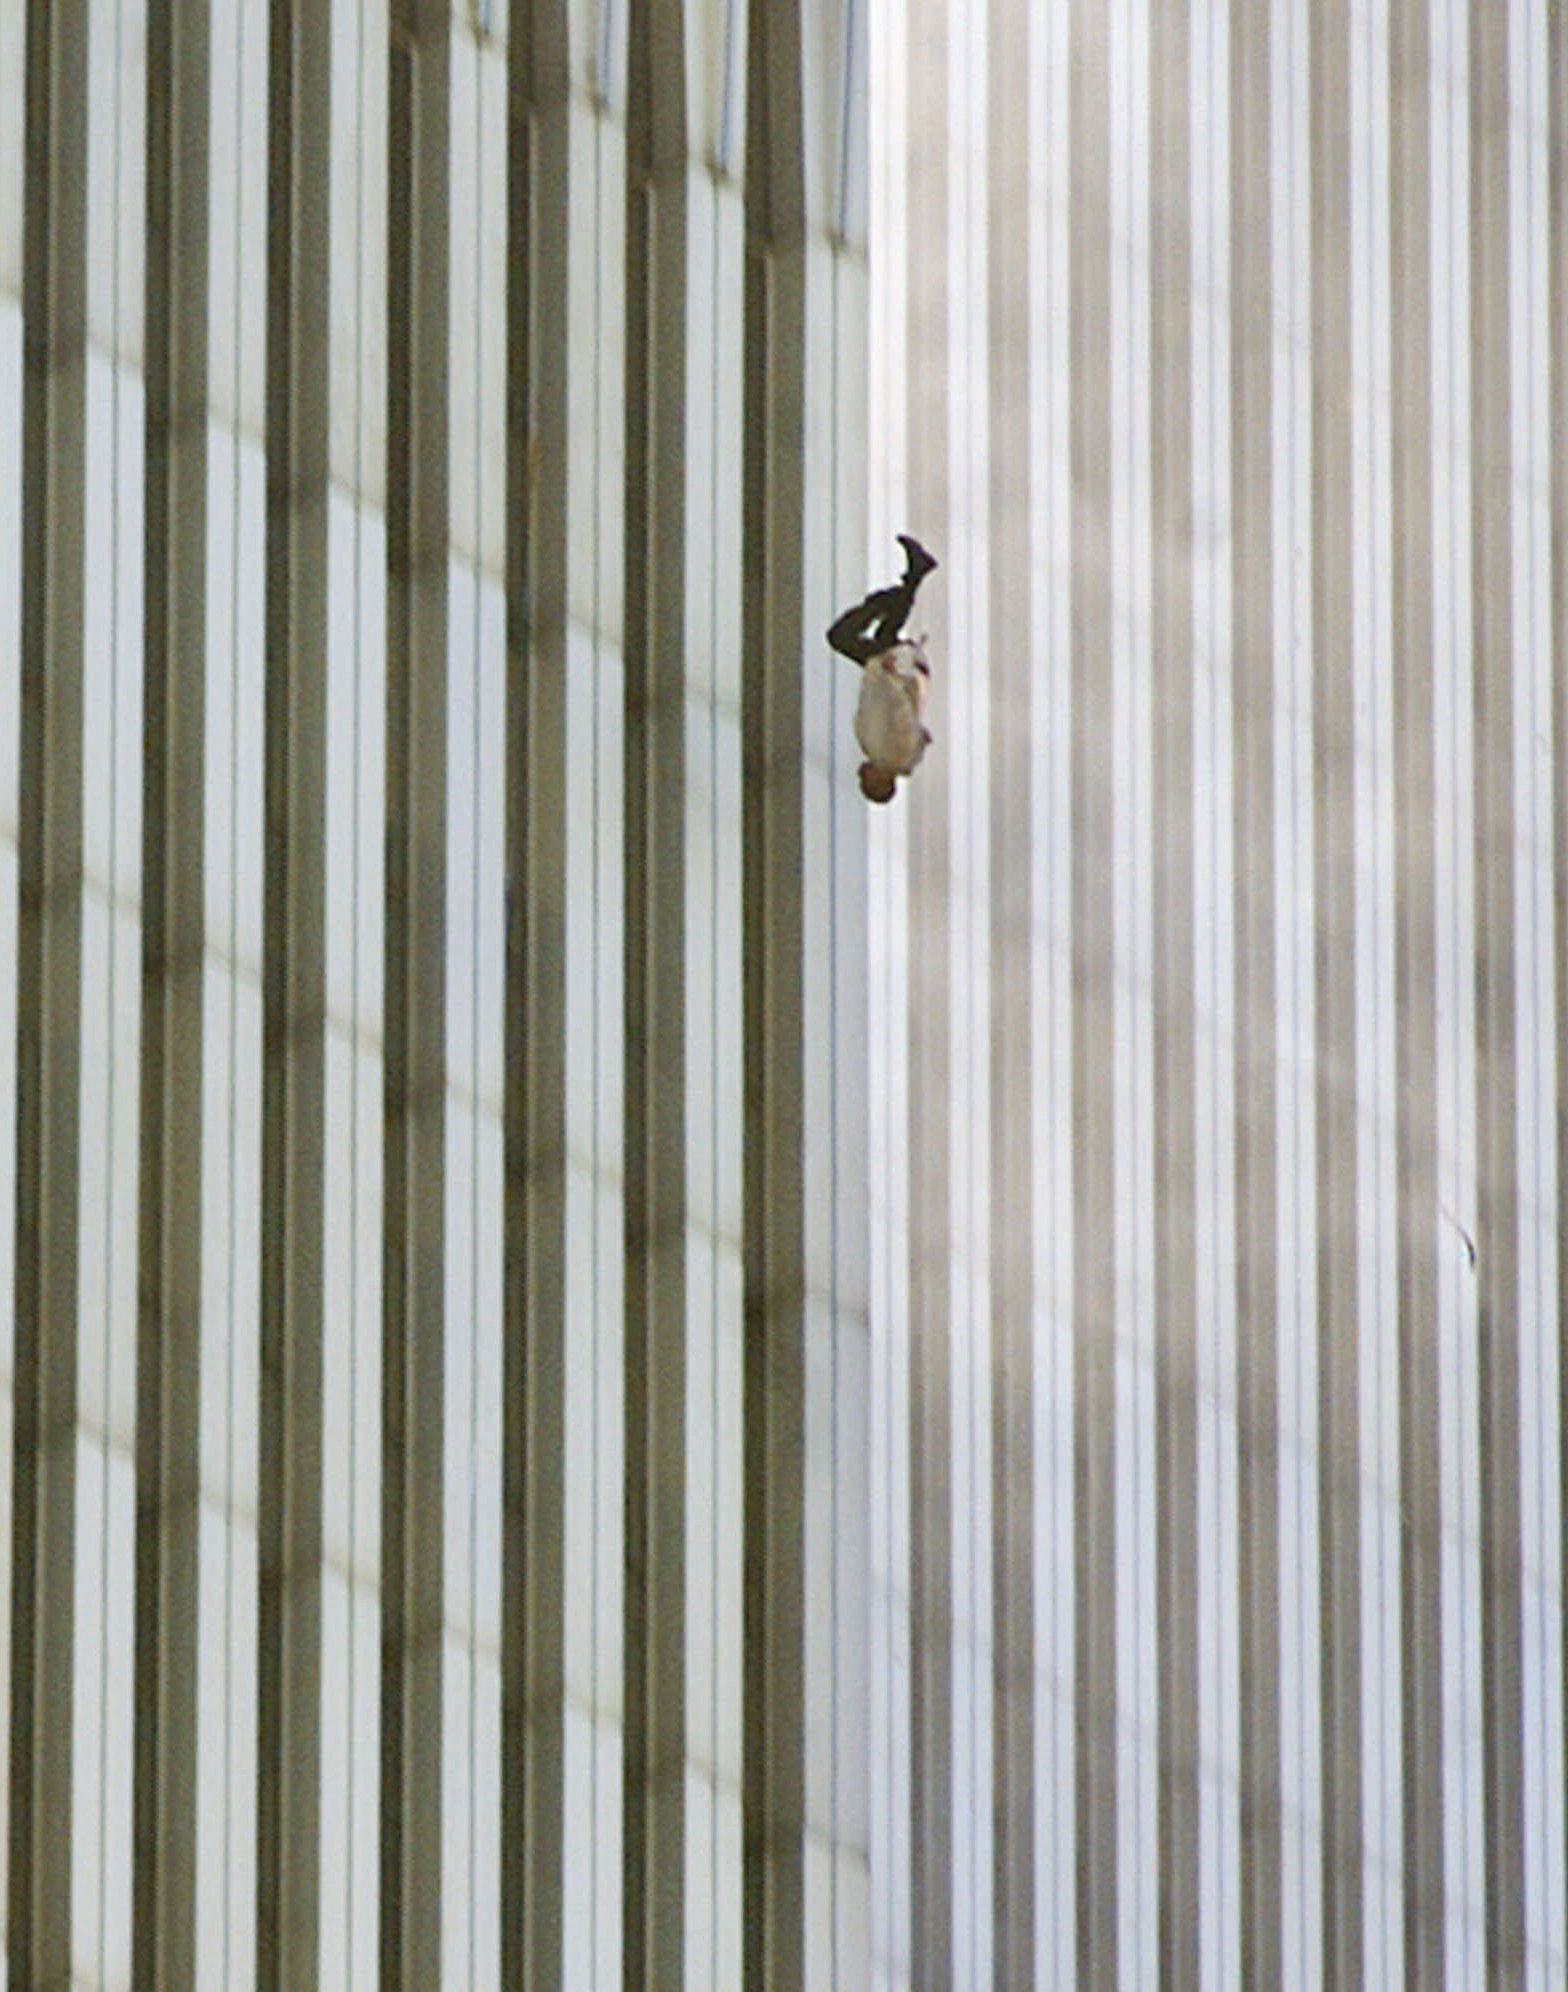 A man jumps to his death from North Tower of the World Trade Center on Sept. 11, 2001.